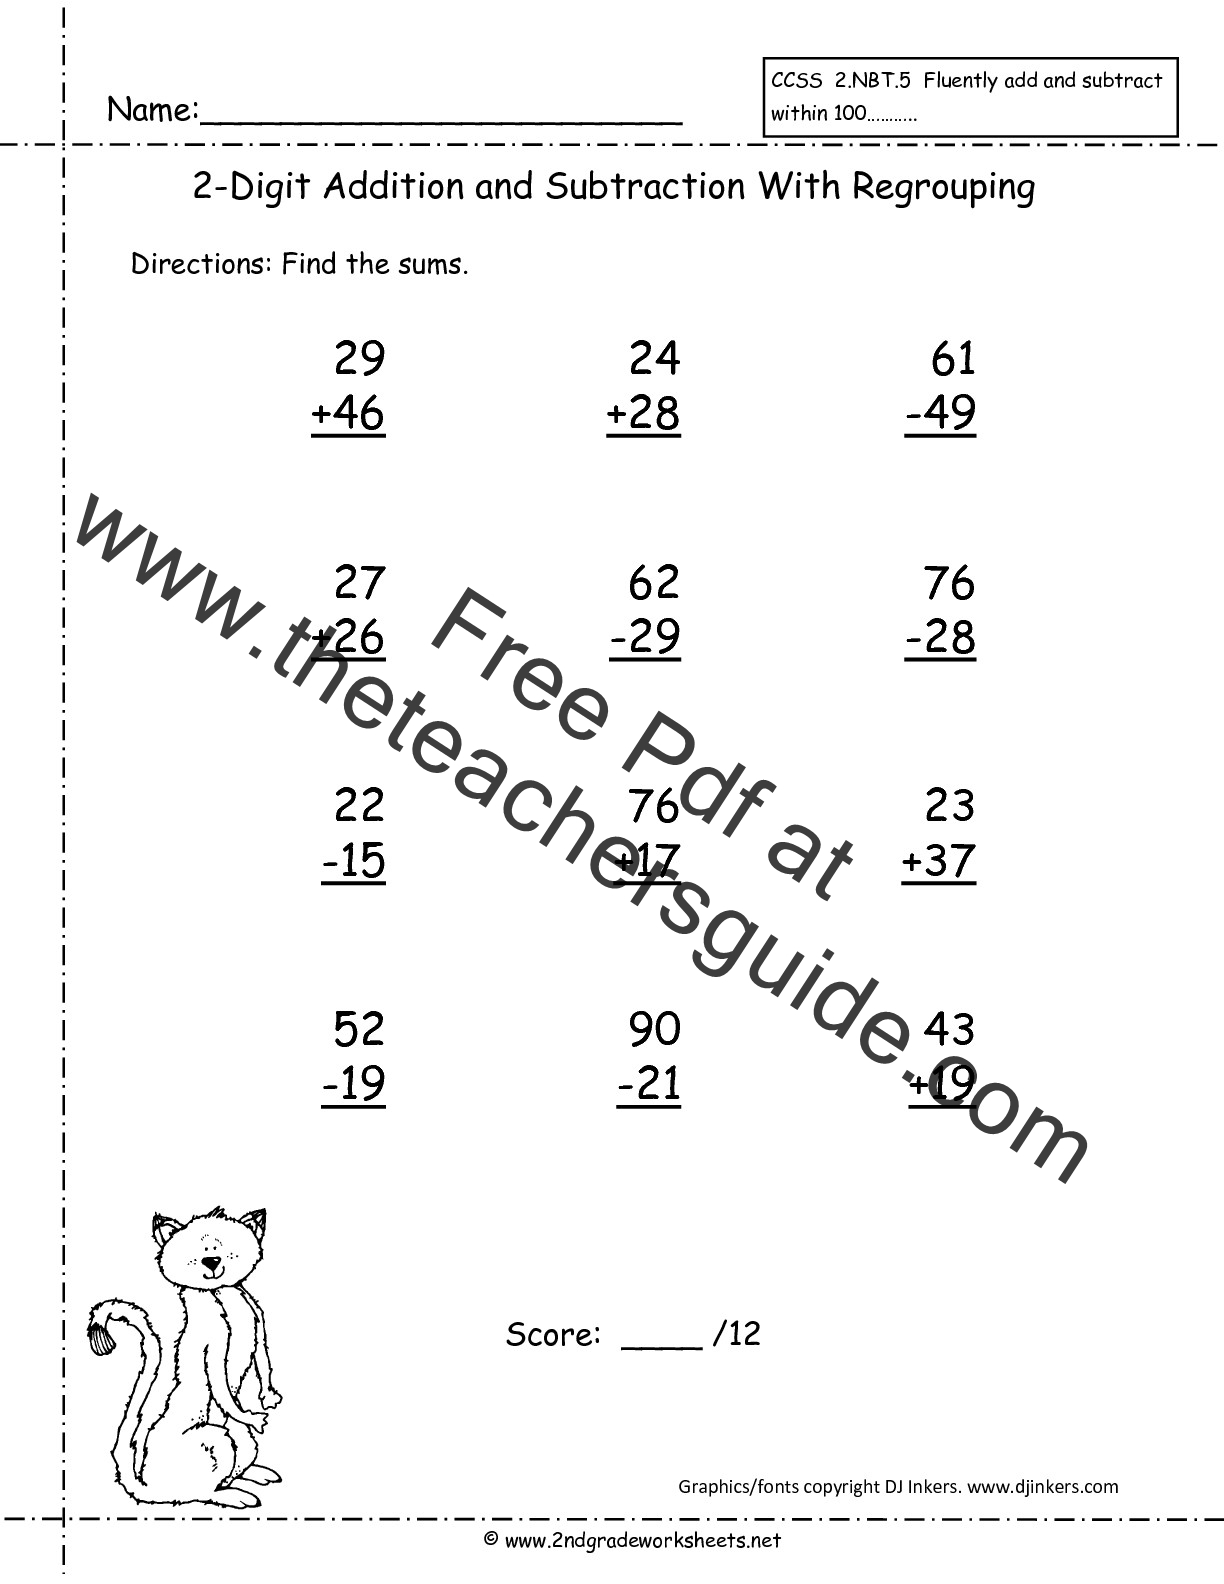 two-digit-addition-and-subtraction-worksheets-from-the-teacher-s-guide